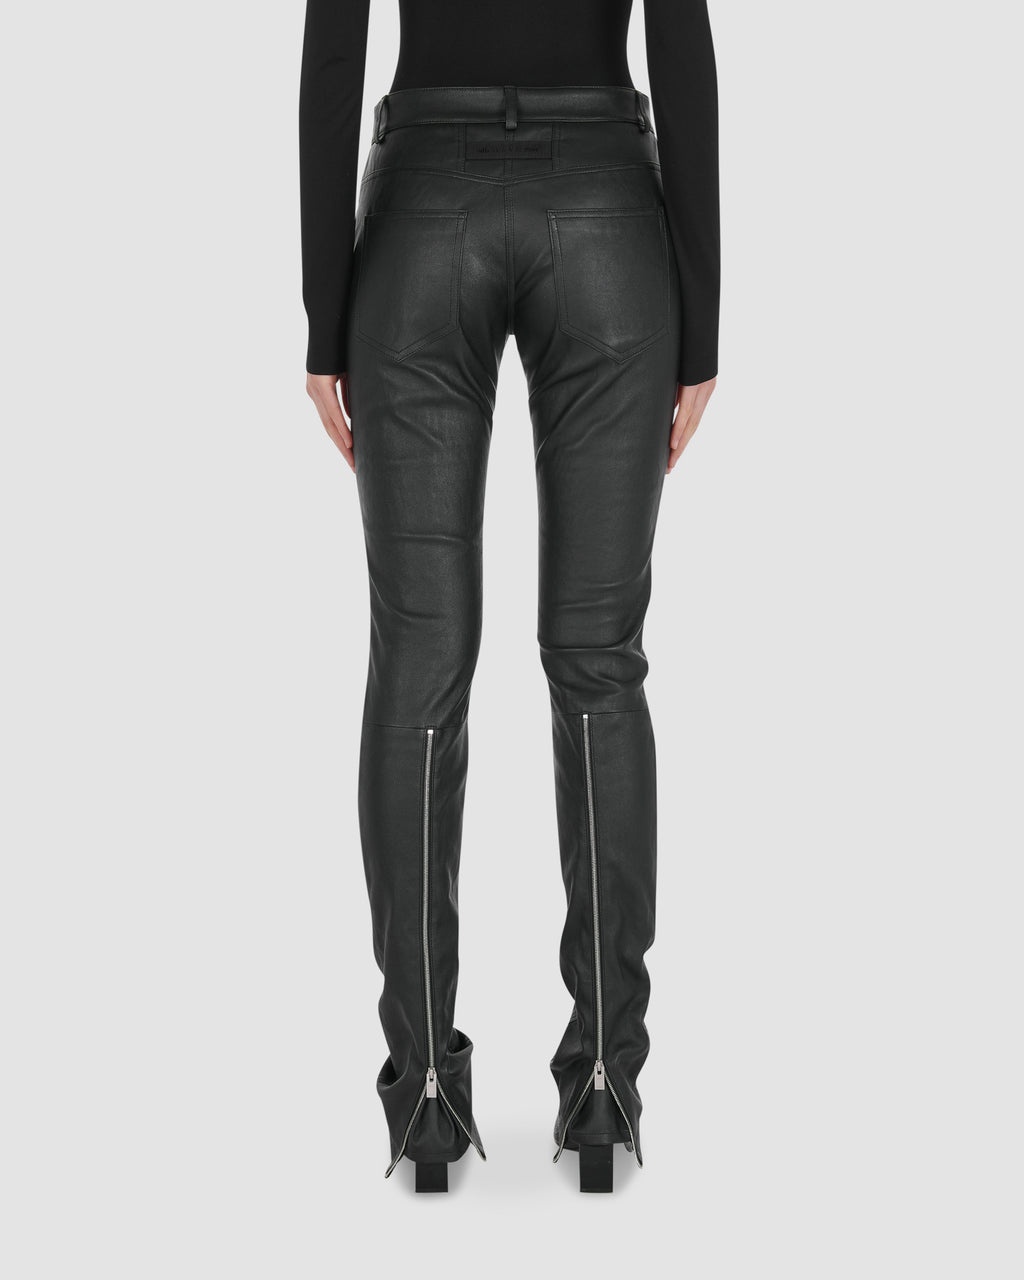 STRETCH LEATHER DEVILLE PANT - 5